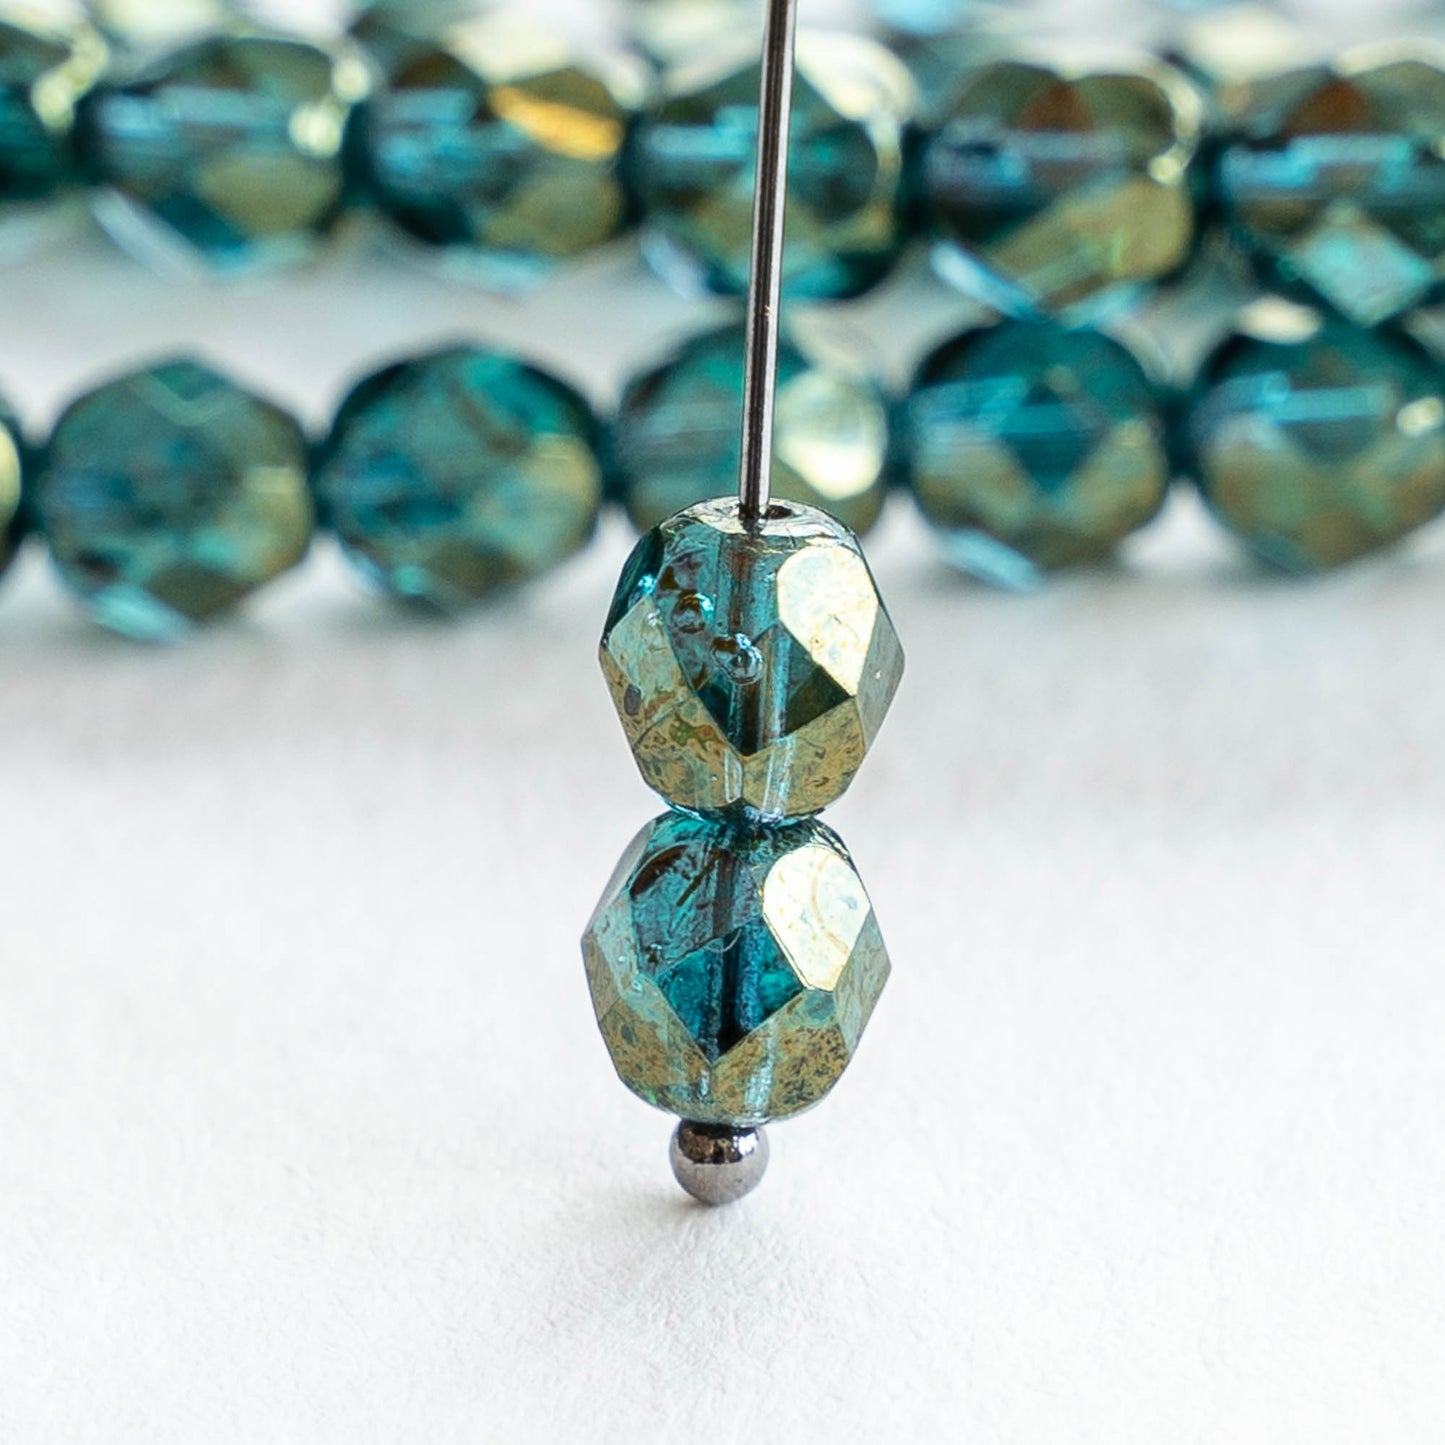 6mm Round Firepolished Beads - Deep Teal with Luster Finish - 25 Beads